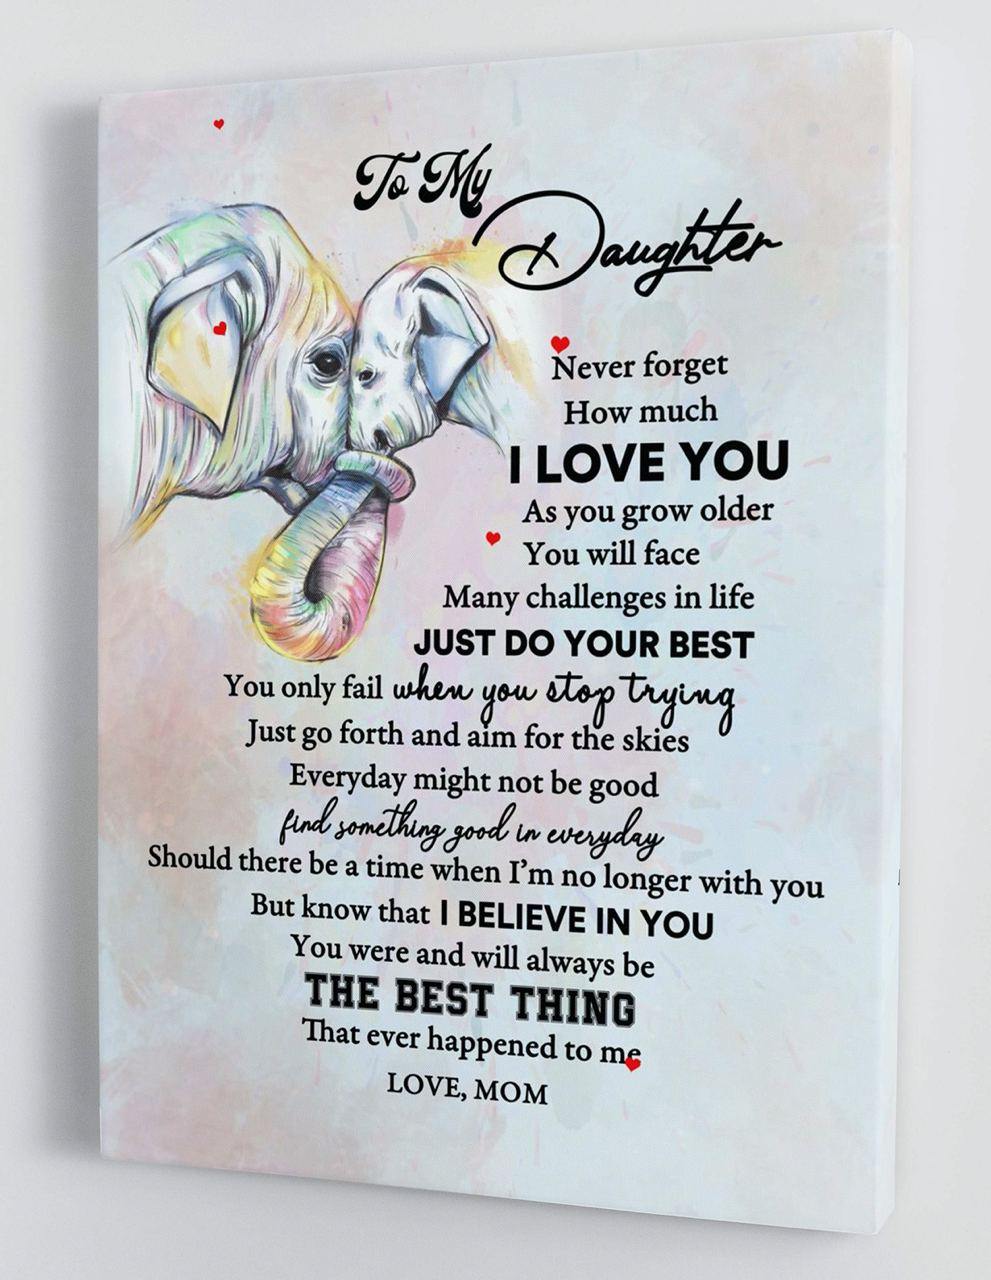 To My Daughter - From Mom - Framed Canvas Gift MD046 - DivesArt LLC